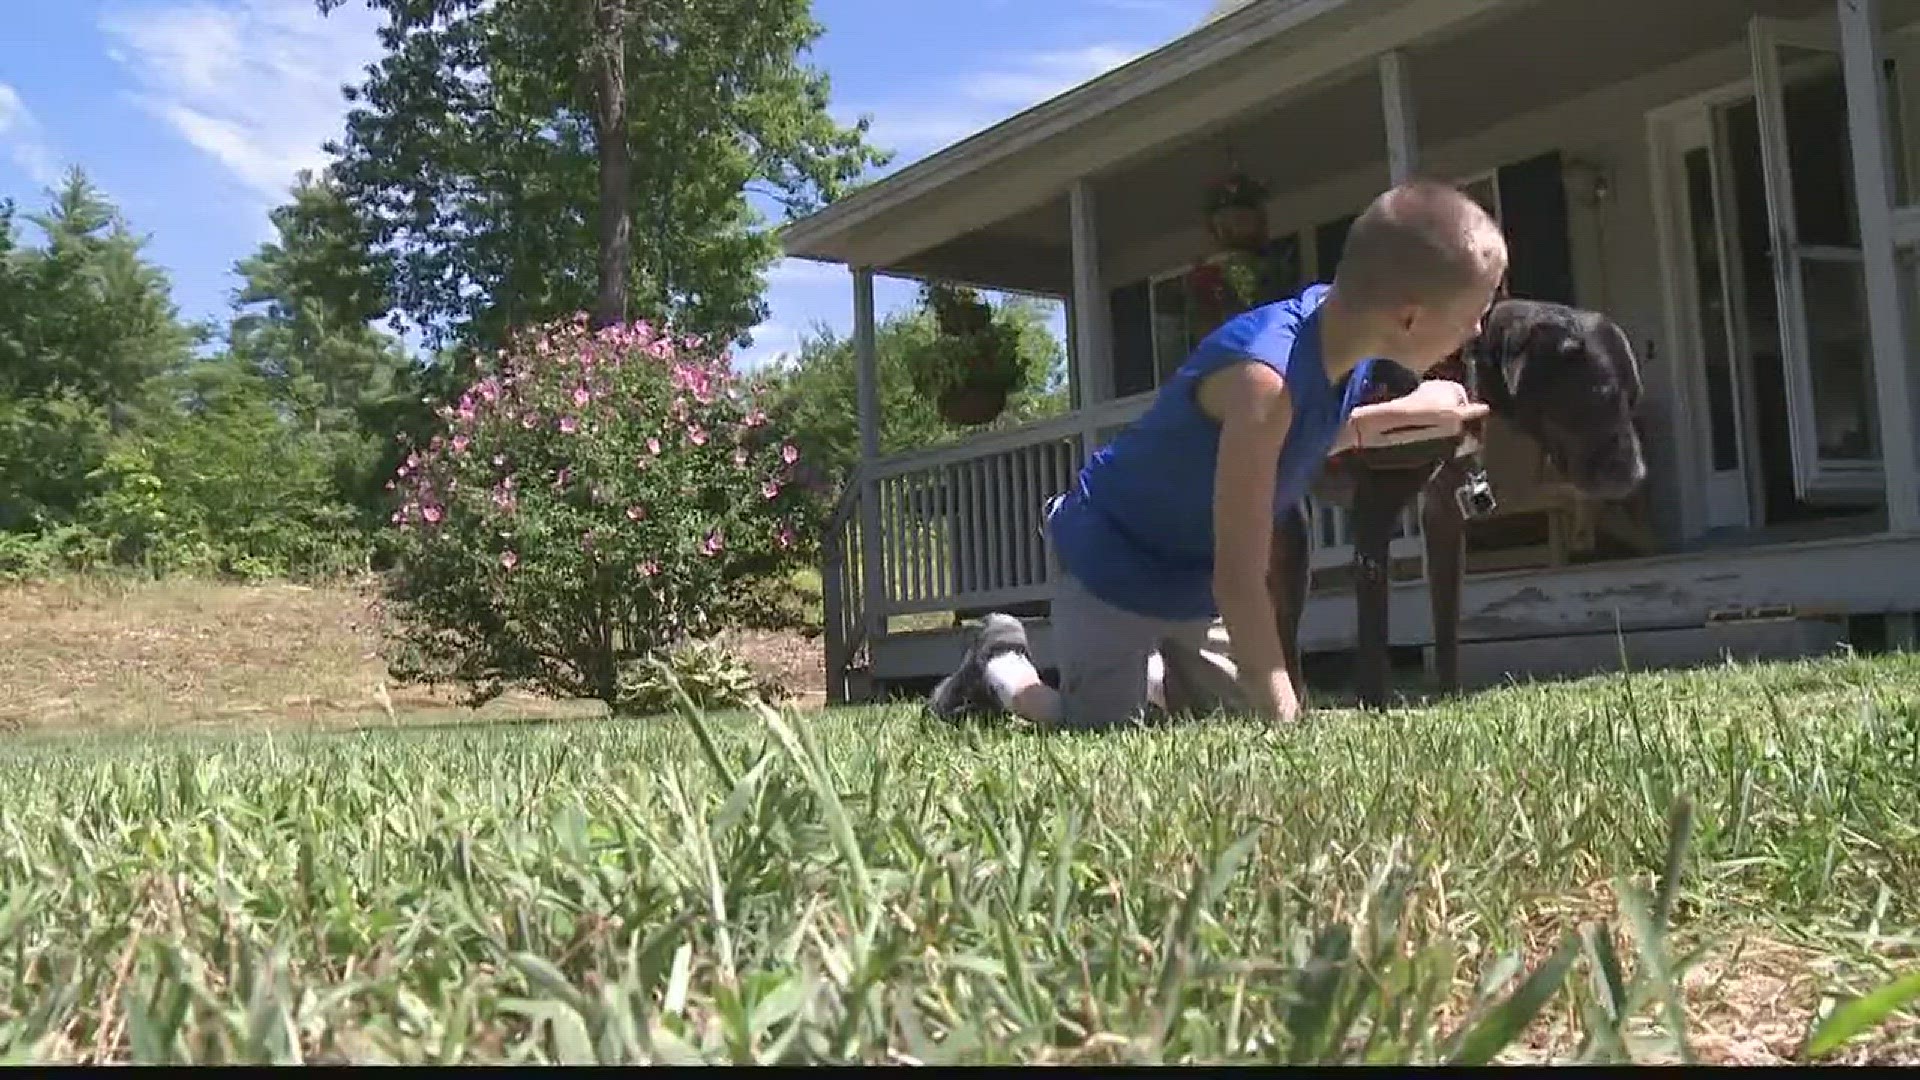 Boy with Cerebral Palsy relies on his service dog